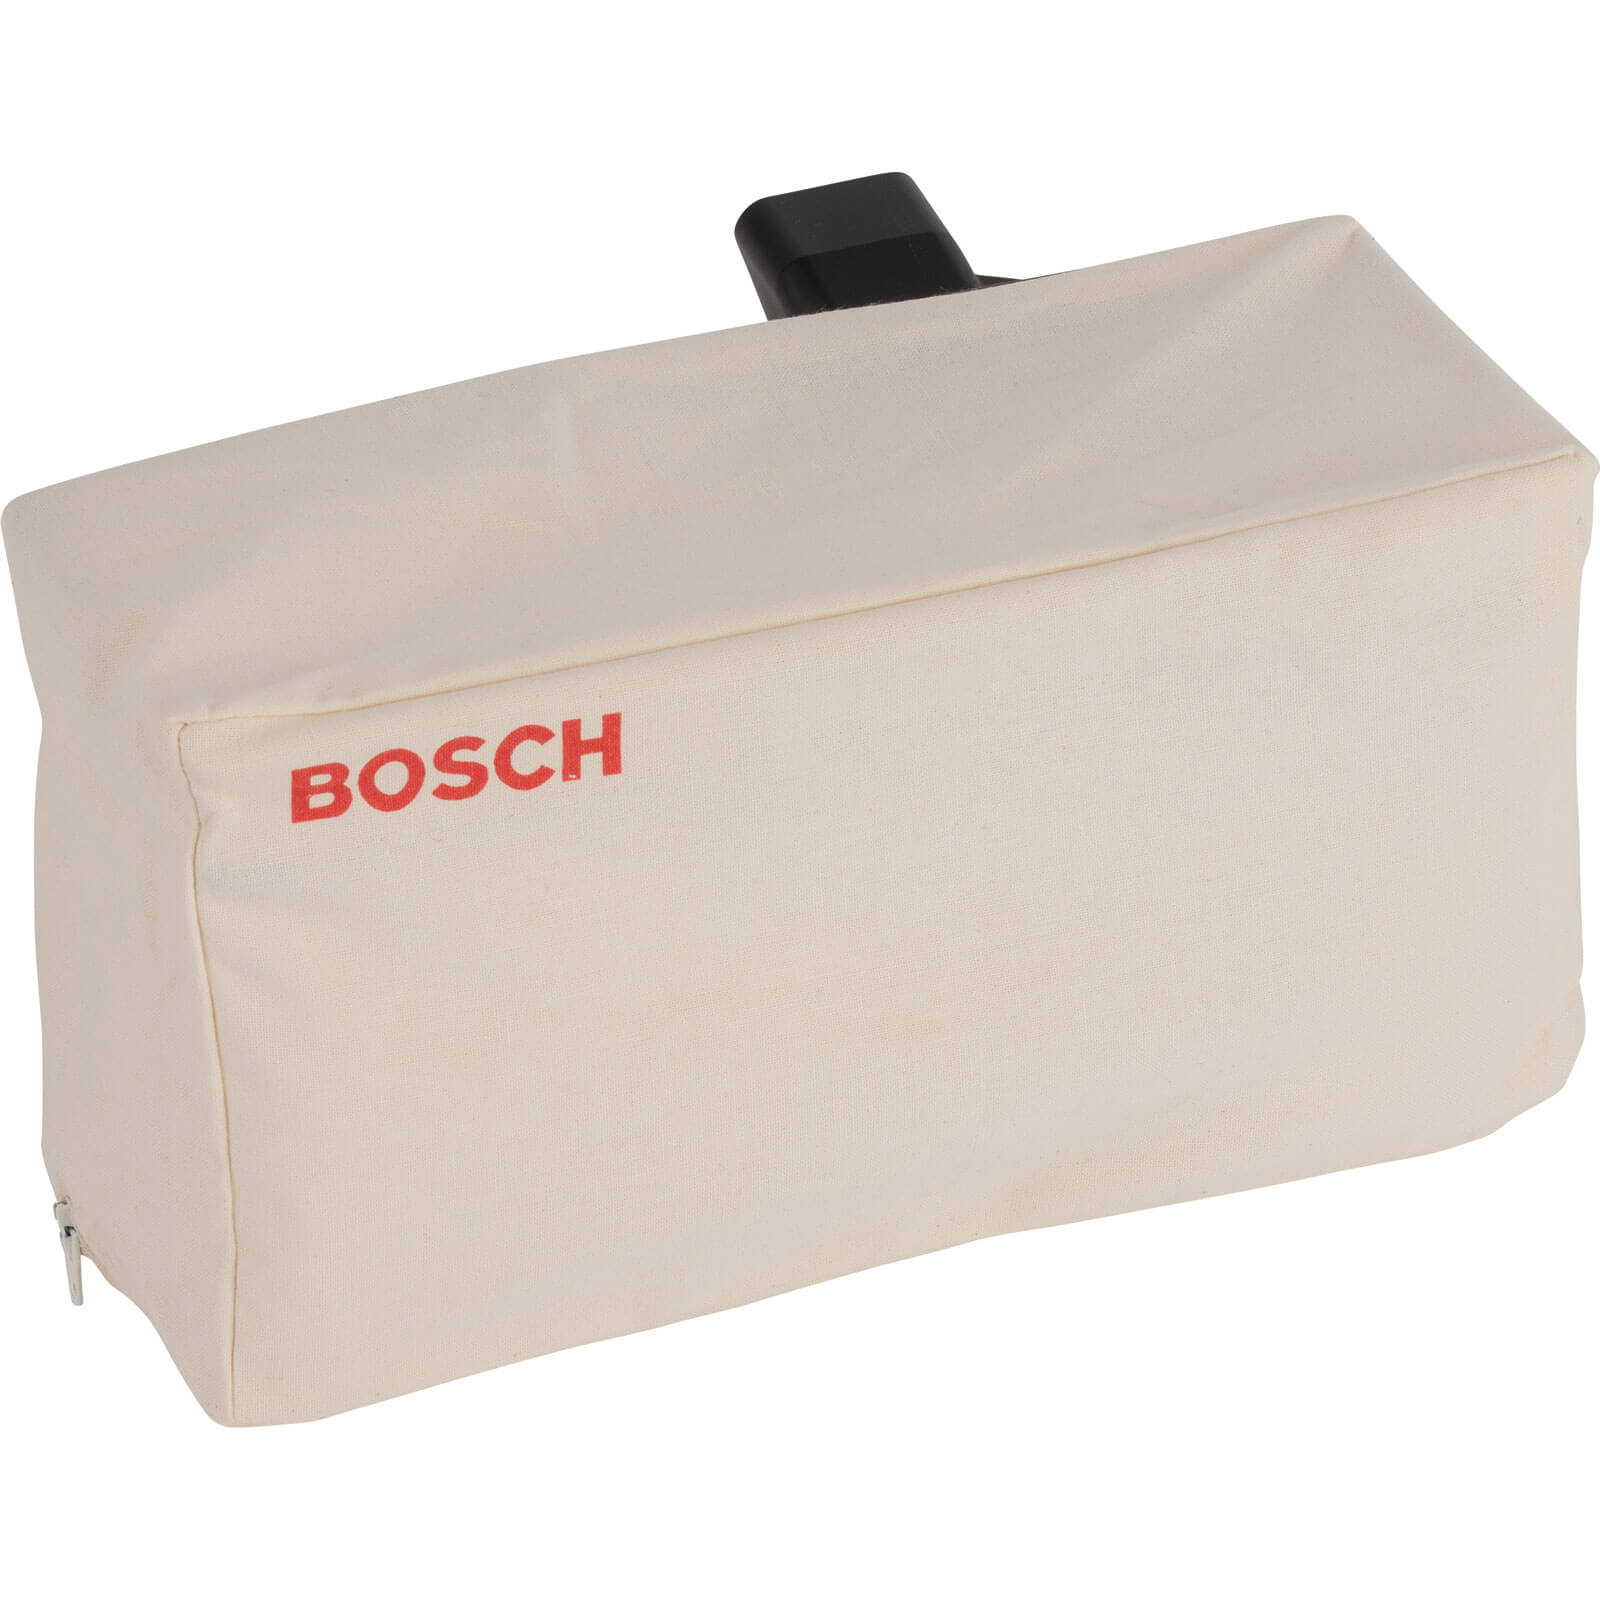 Image of Bosch Dust Bag for PHO 1 and 15-82 and 100 Planers